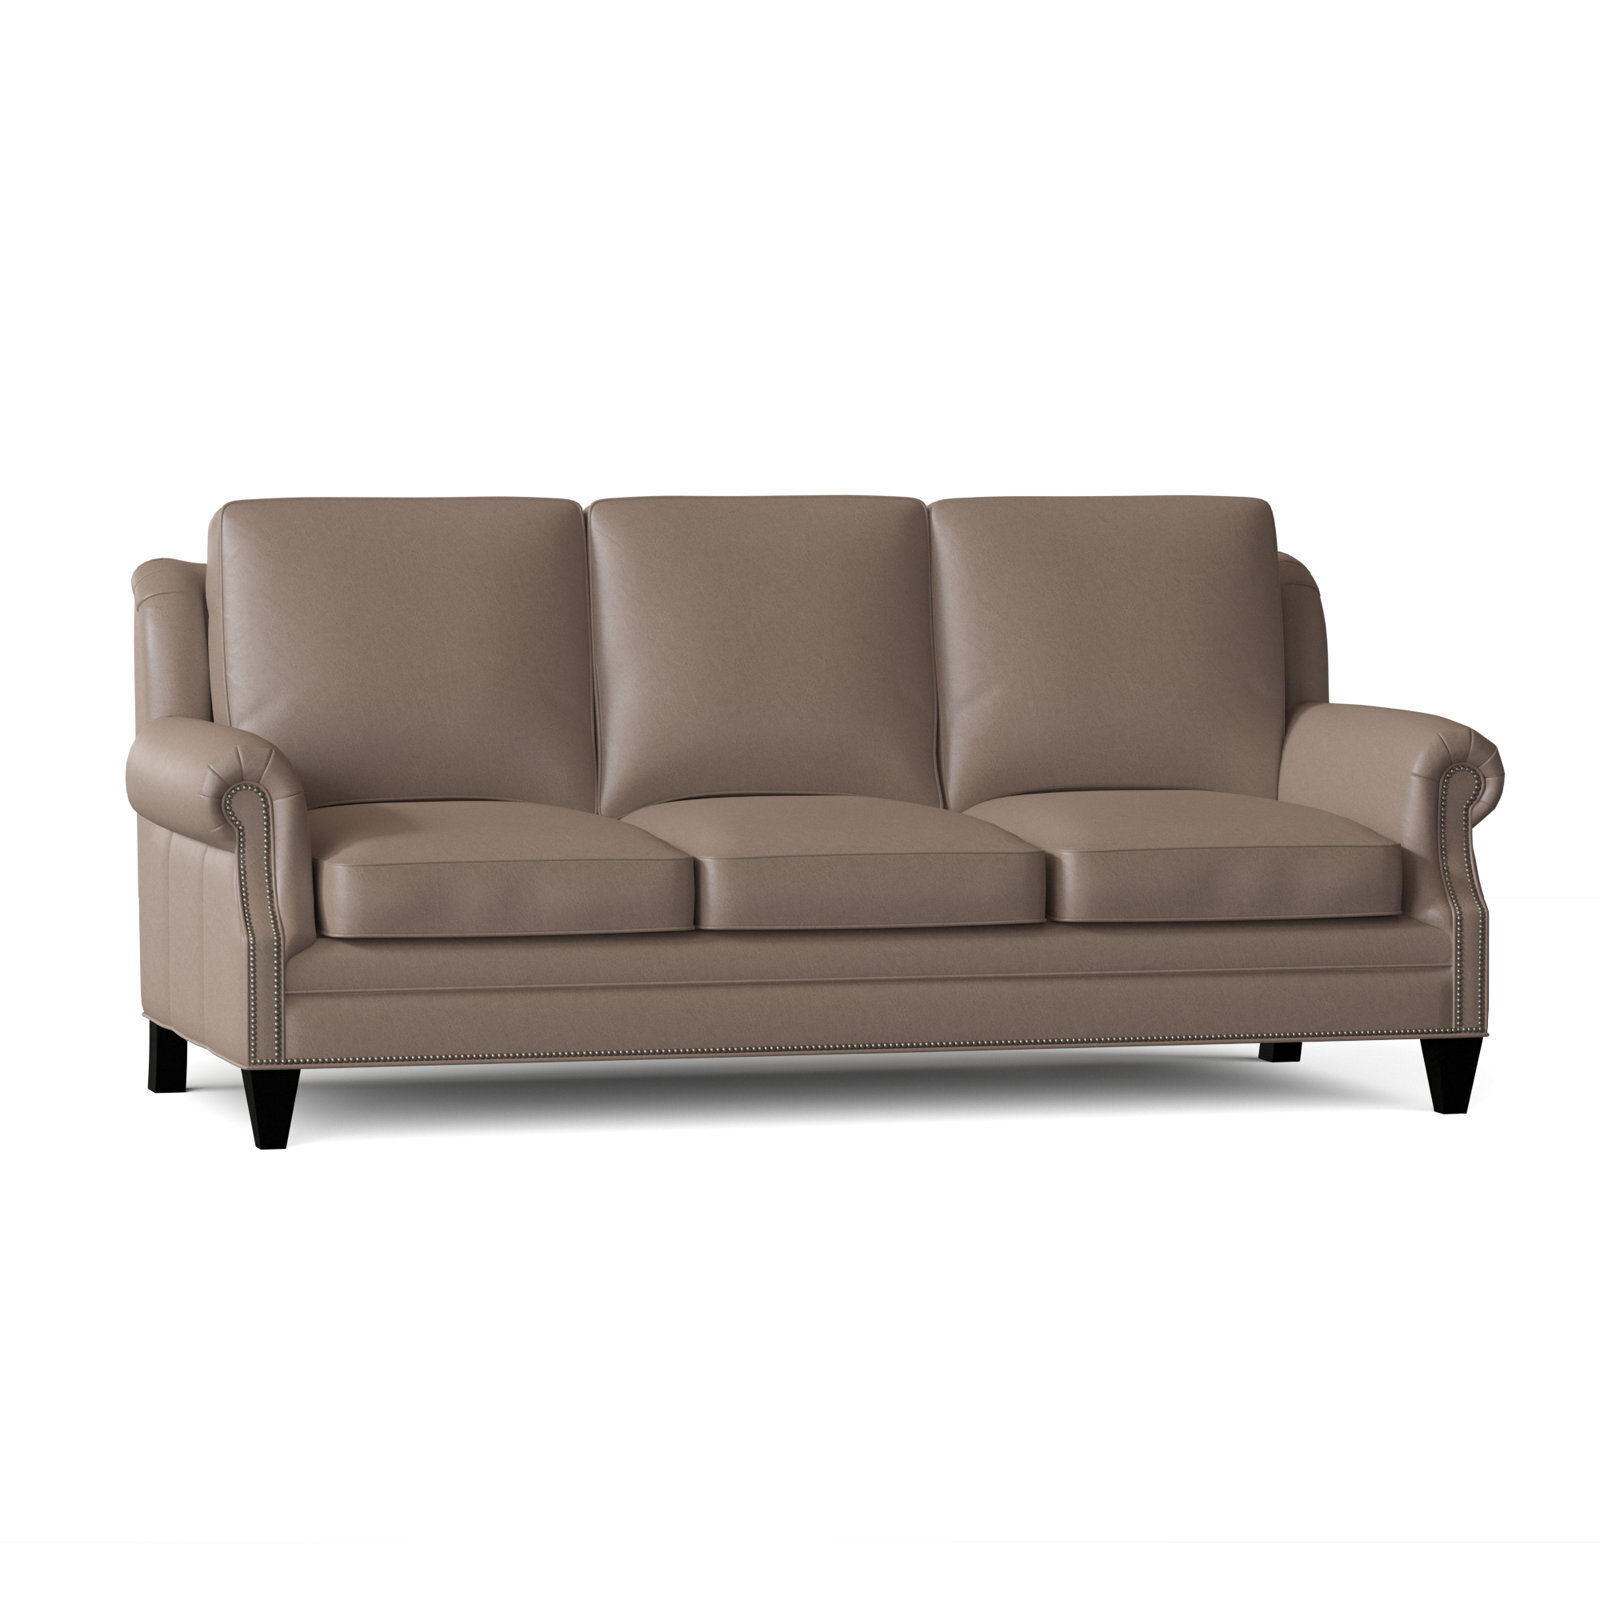 Taupe Leather Sofa With Down Filled Cushions